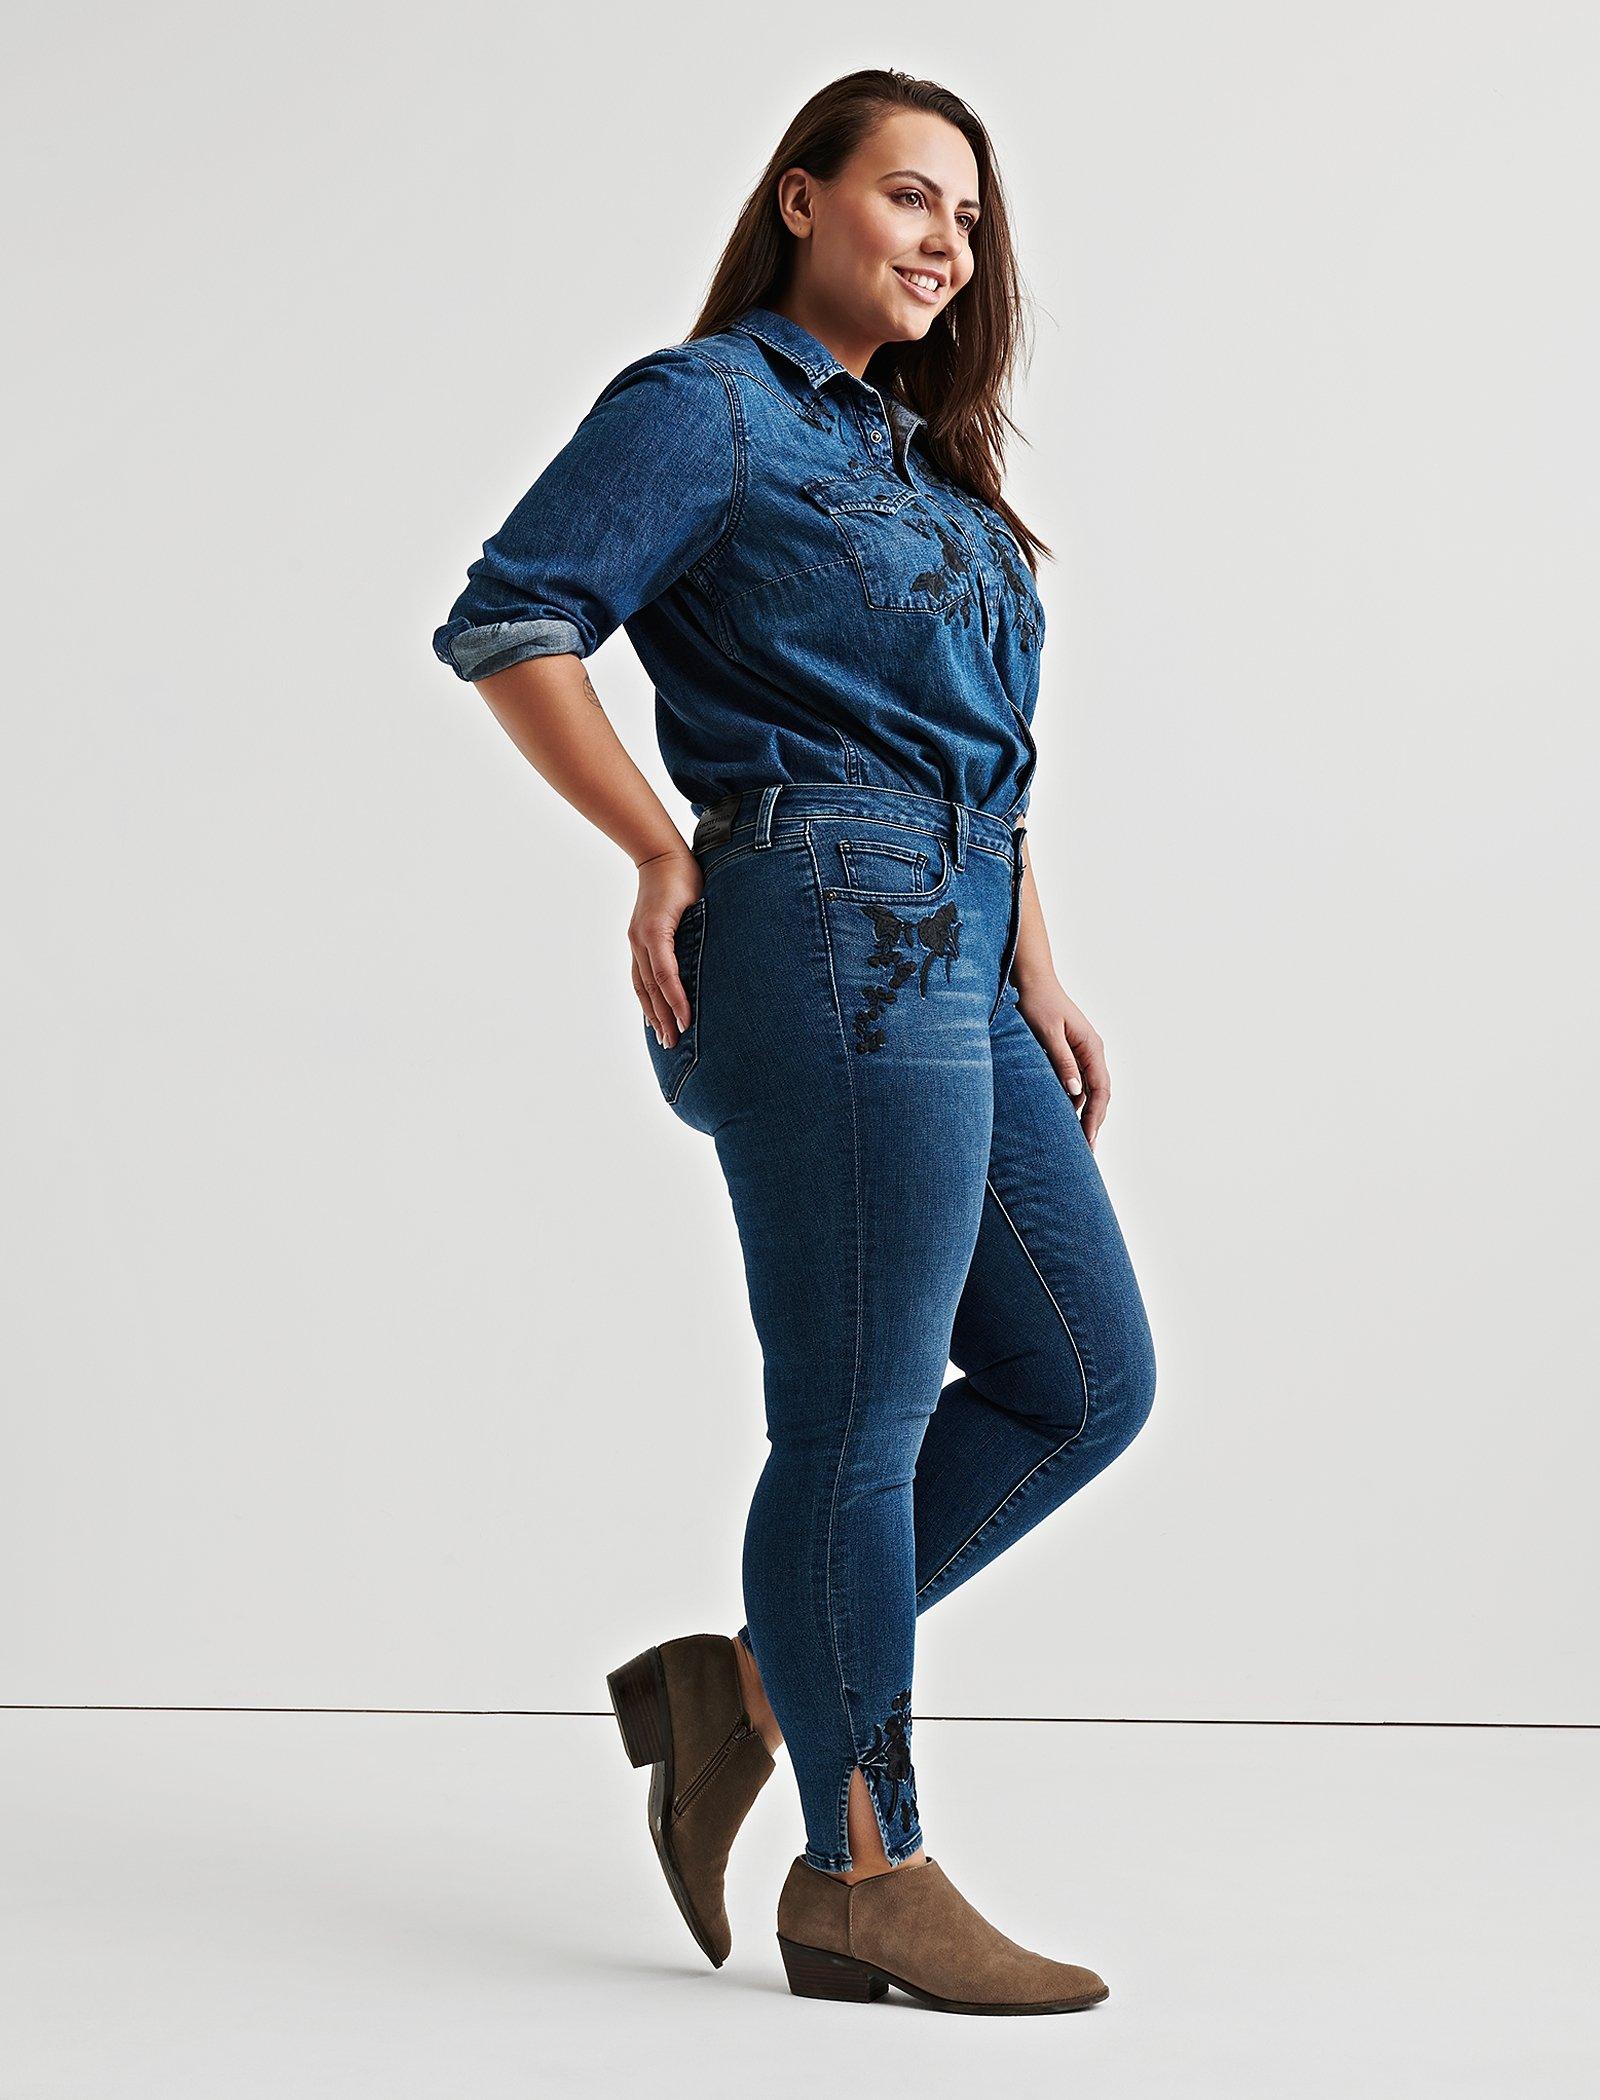 lucky brand plus size pants